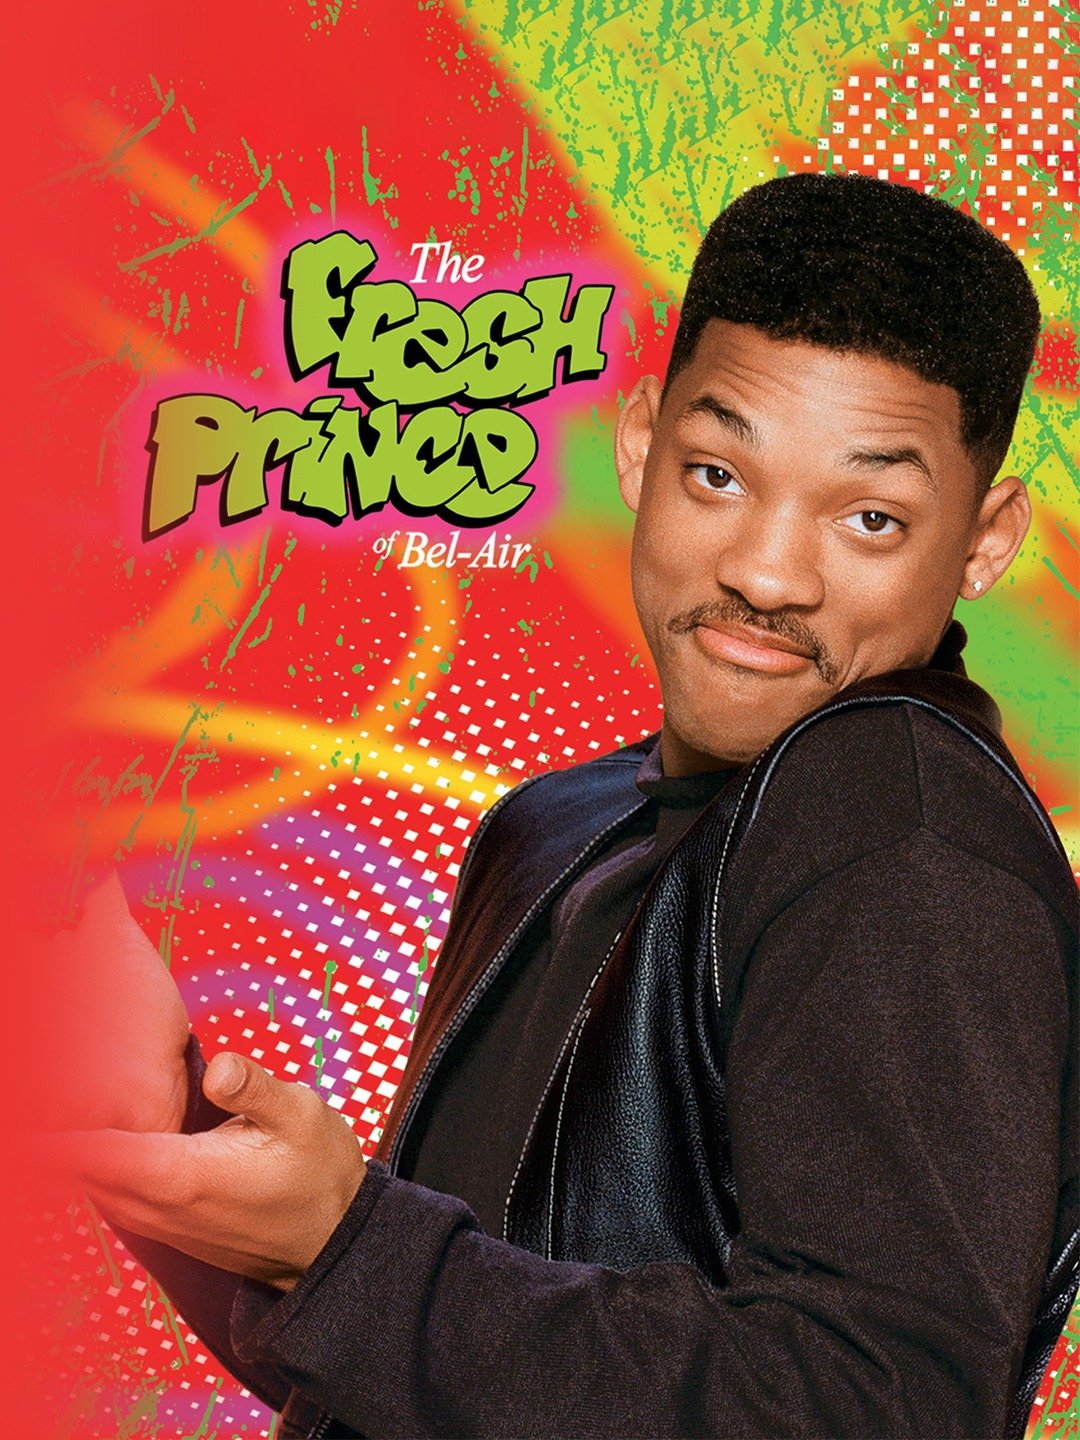 must watch fresh prince of bel air episodes